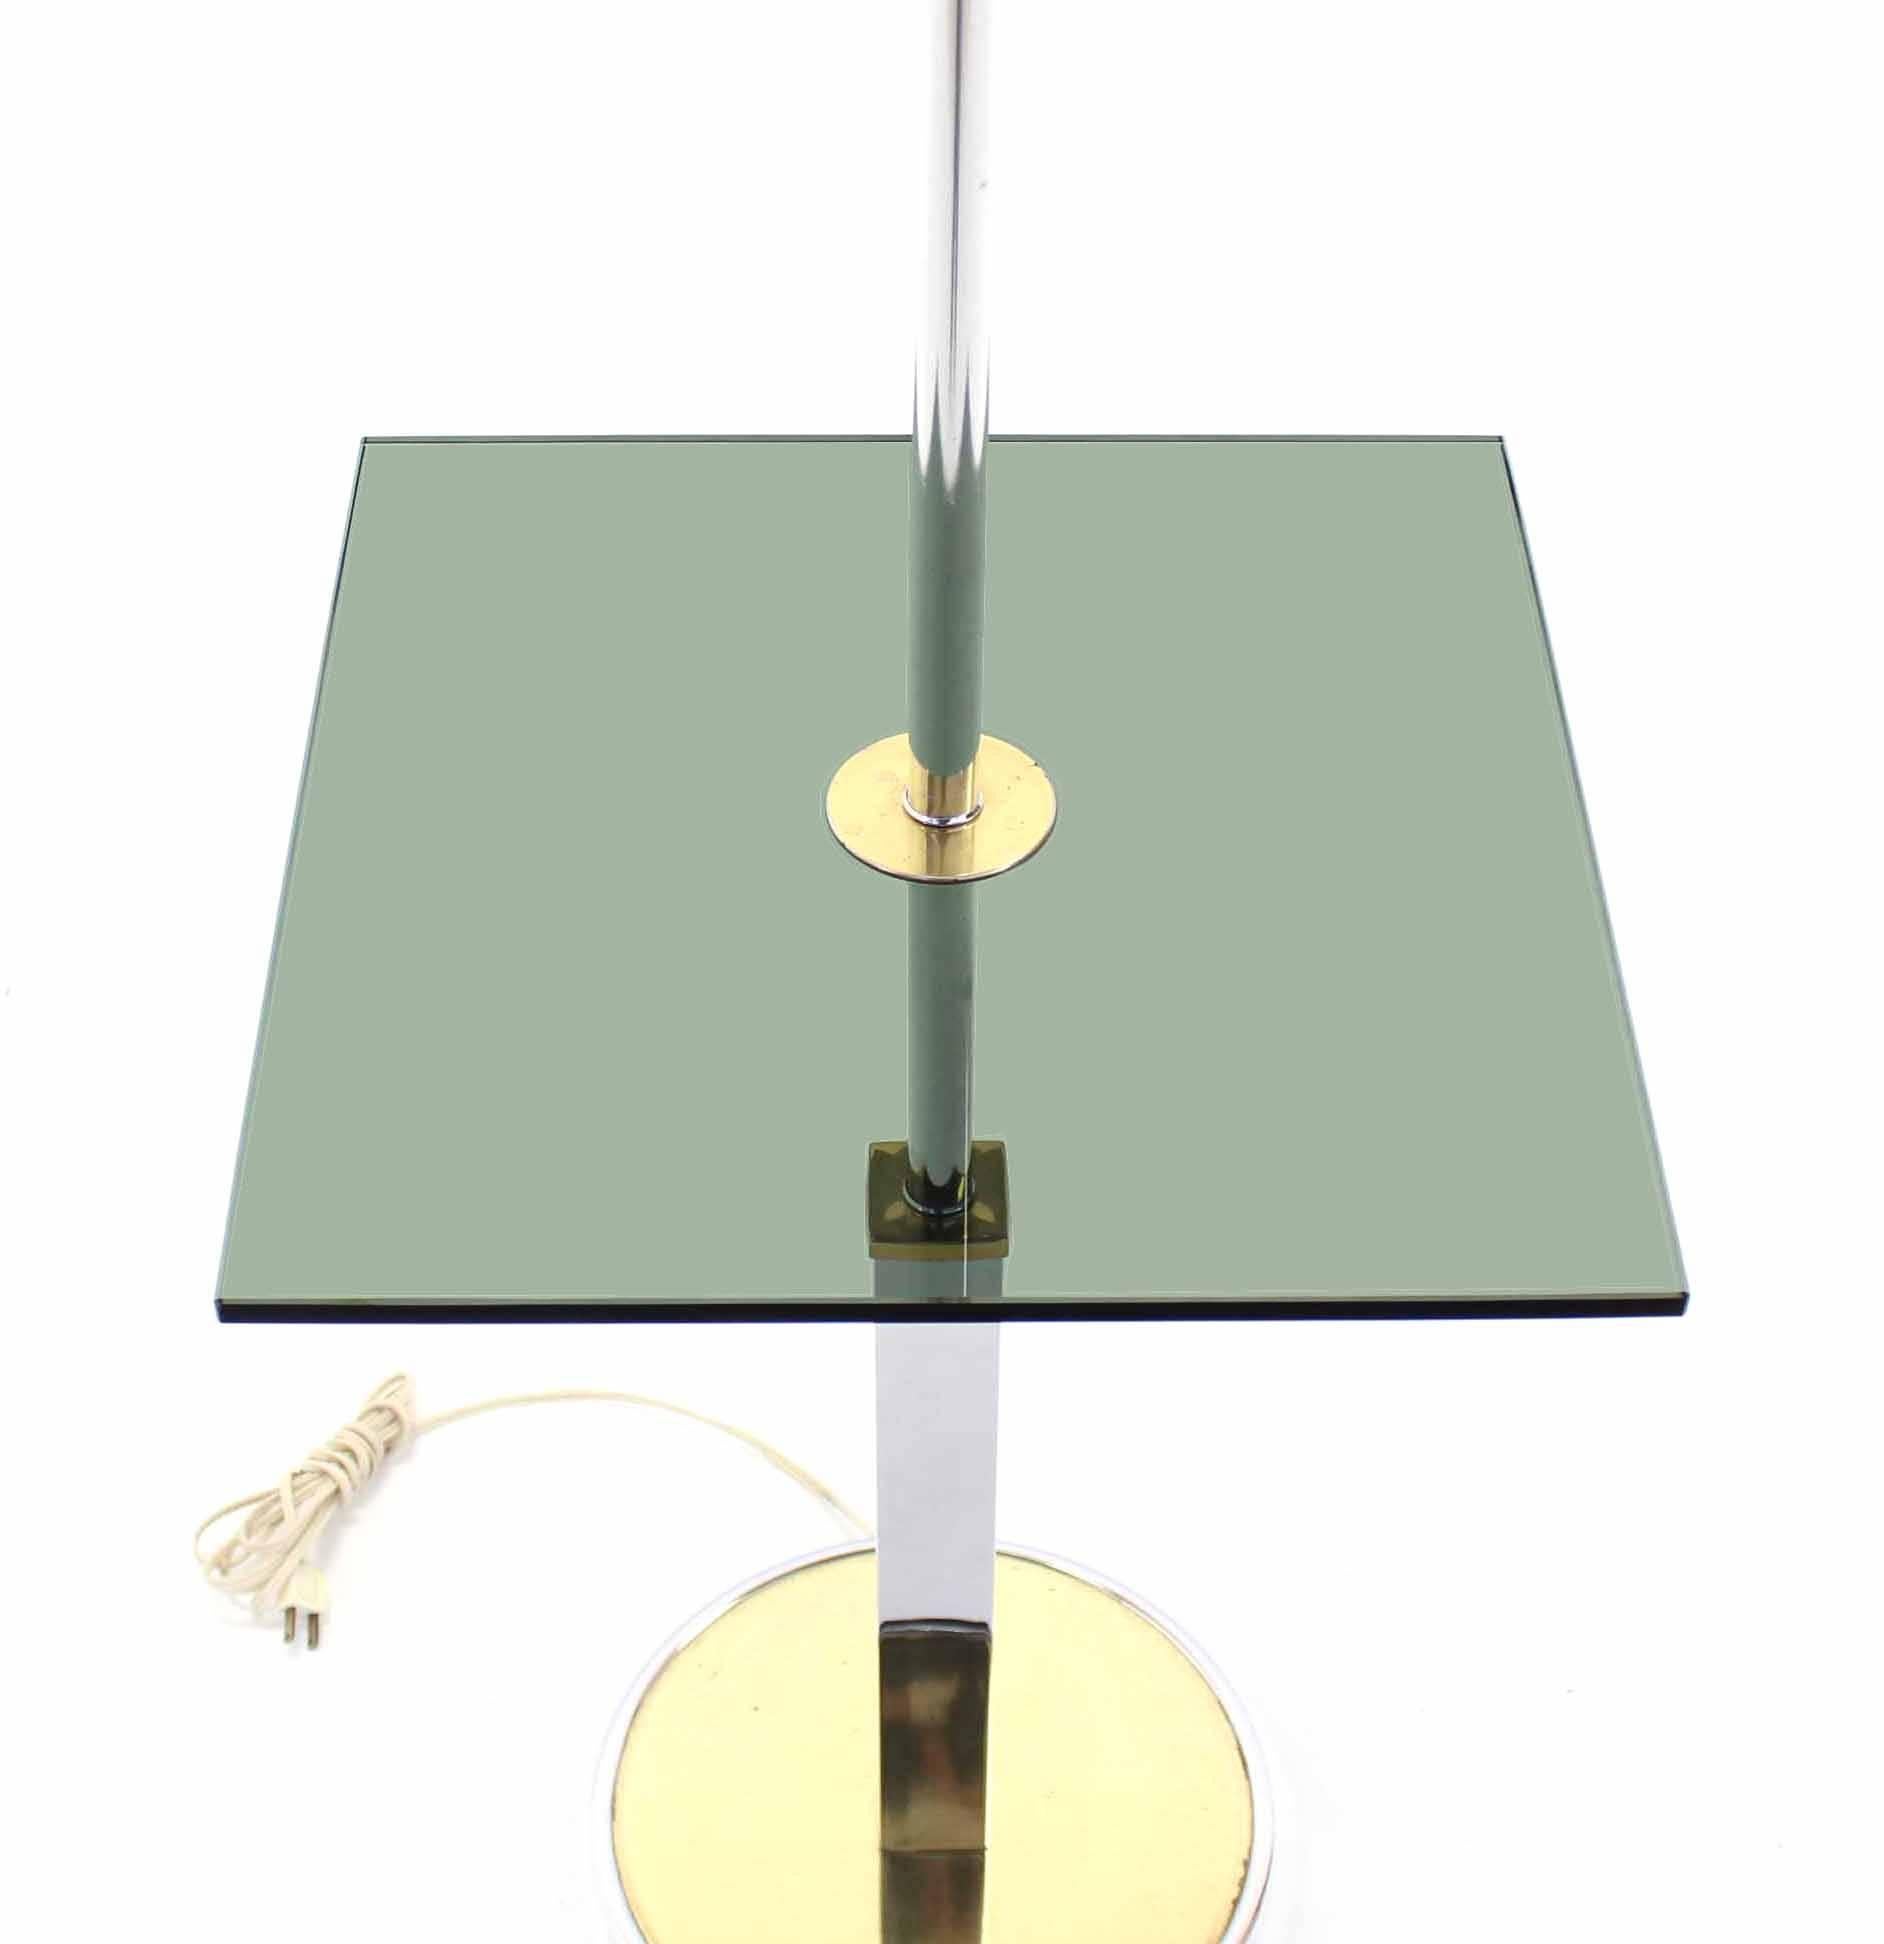 American Mid-Century Modern Smoked Glass Side Table Floor Lamp For Sale